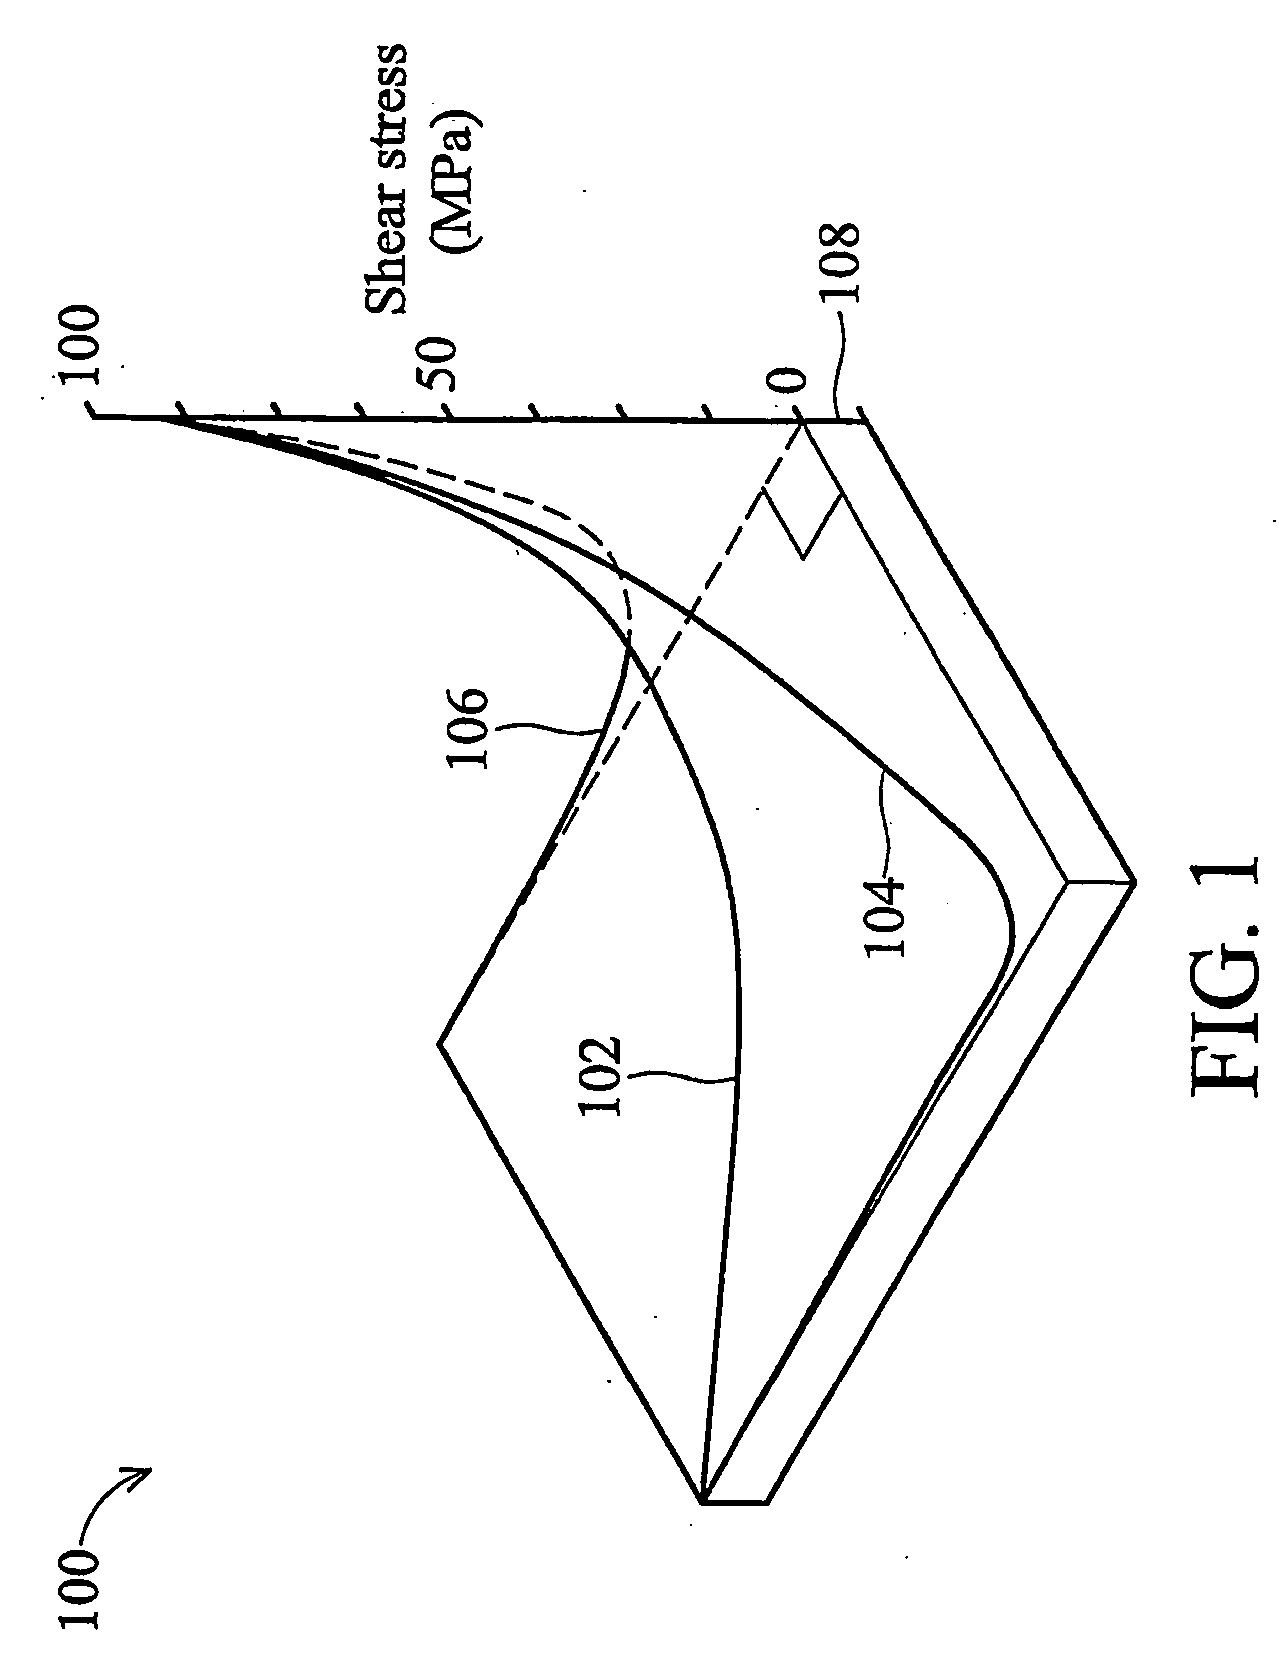 Low stress semiconductor device coating and method of forming thereof